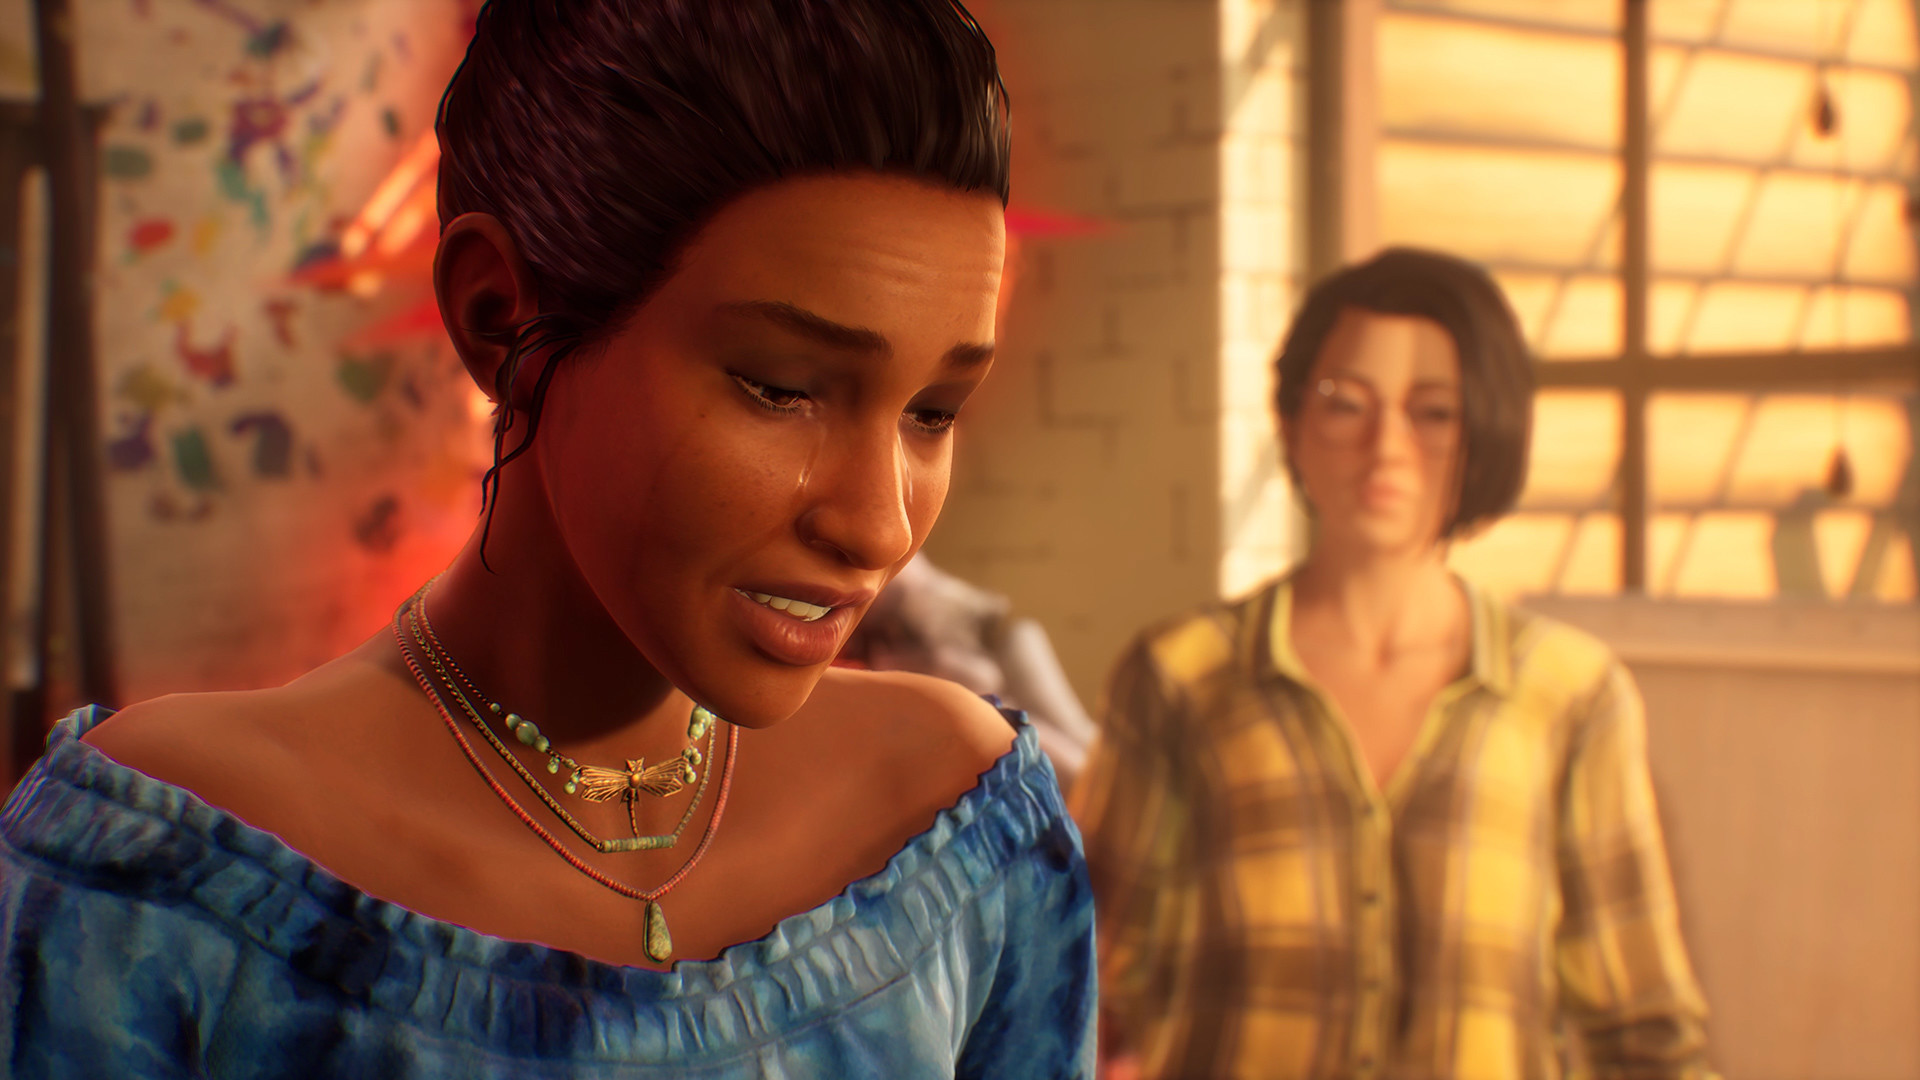 Life is Strange: True Colors will let you LARP and play music with Steph -  Gayming Magazine